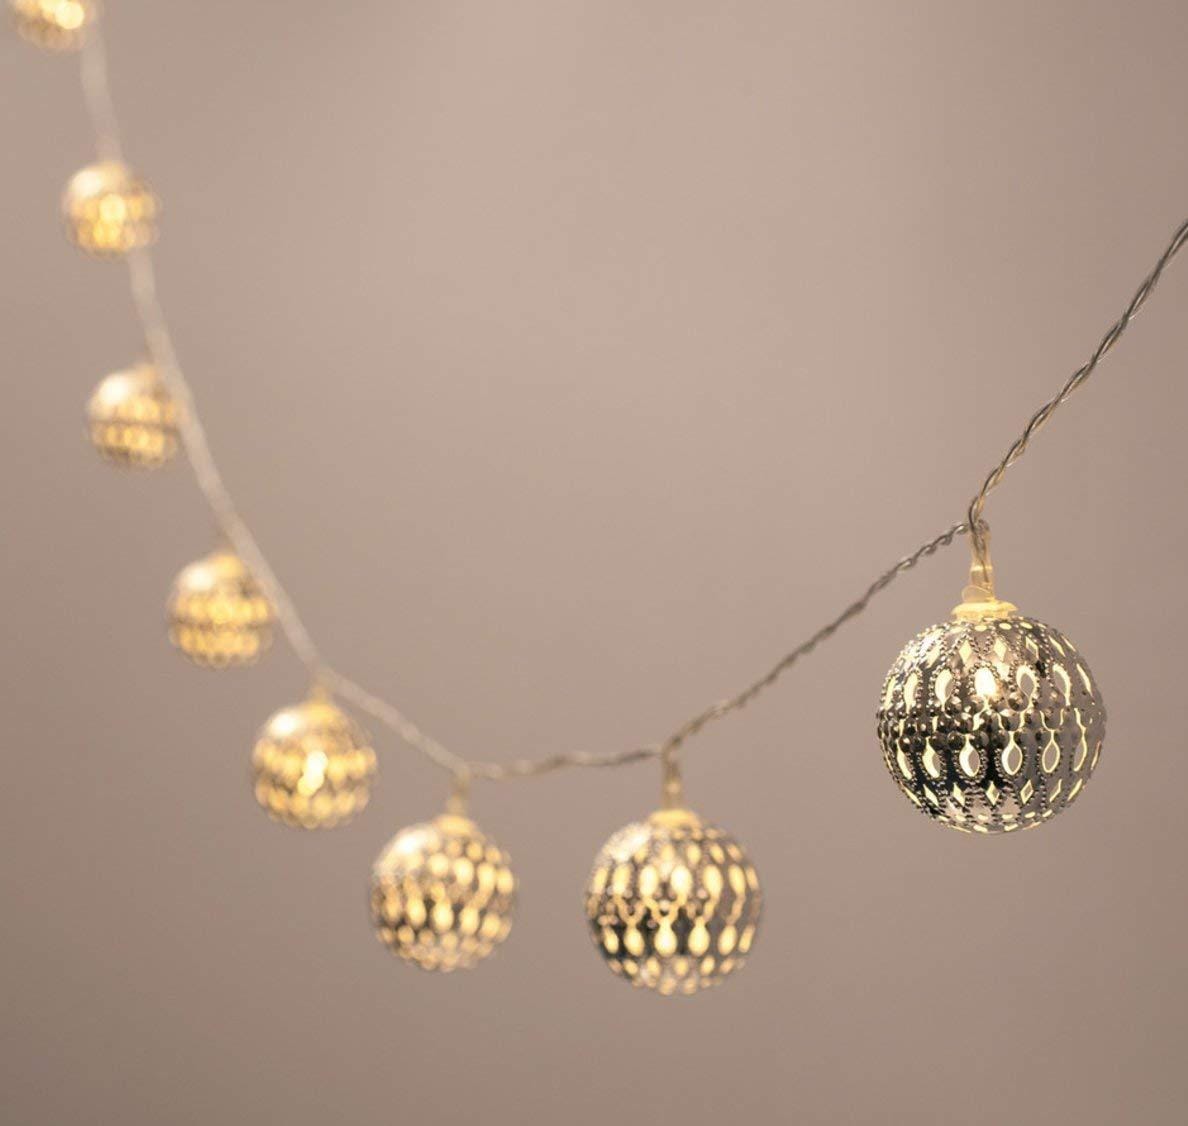 Morrocan Balls Metal Light String with 10 Silver Ball & White LED Lights (1.3 m)